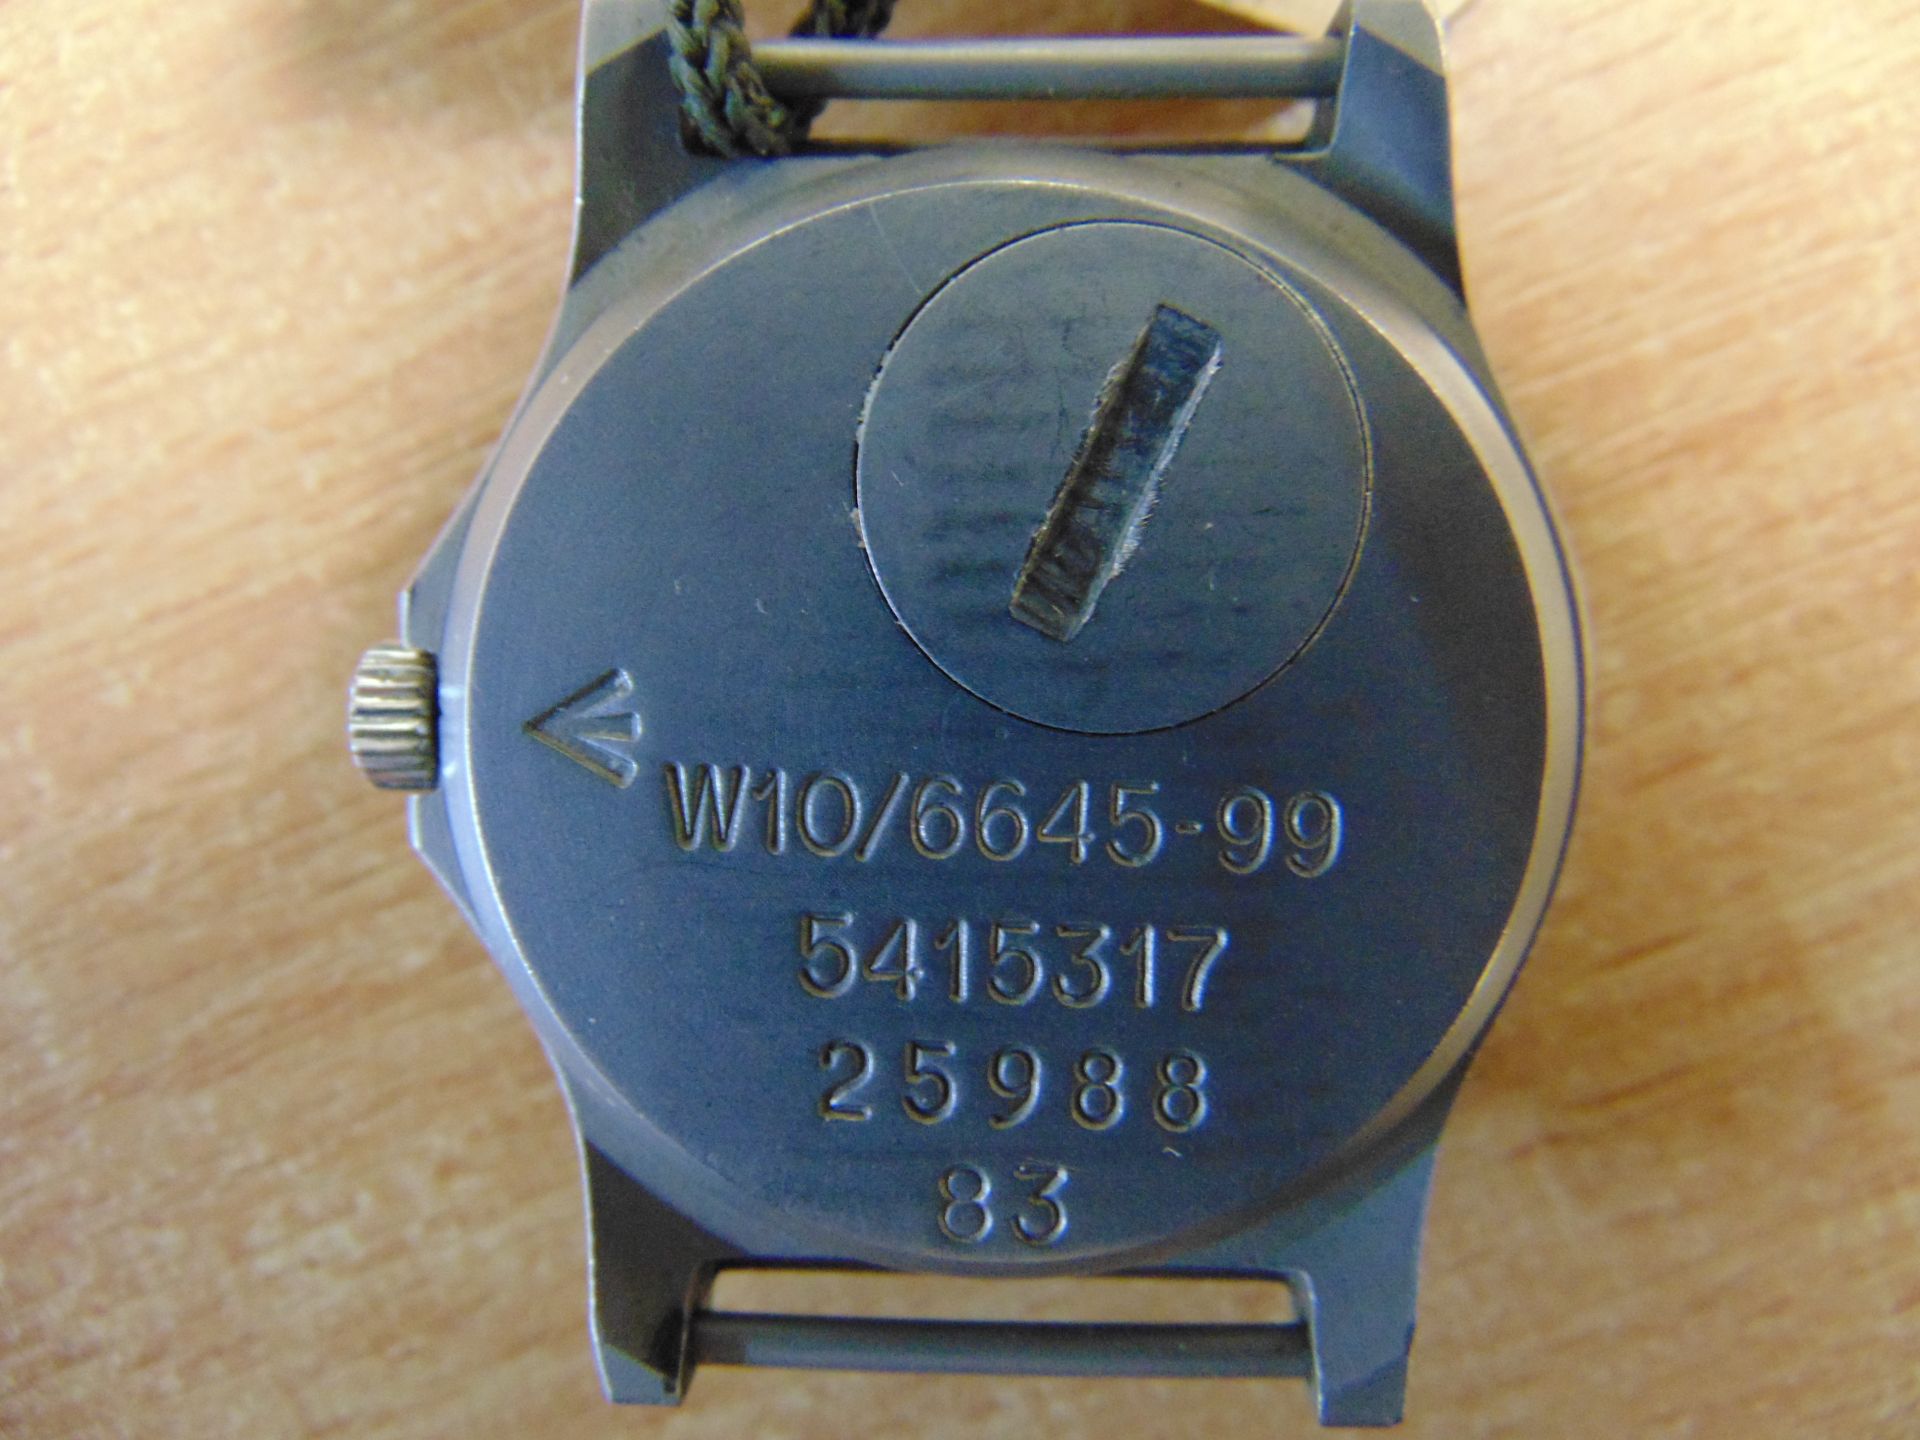 VERY NICE CWC W10 BRITISH ARMY SERVICE WATCH FAT BOY DATE 1983 NATO MARKS SN.25988 - Image 5 of 6